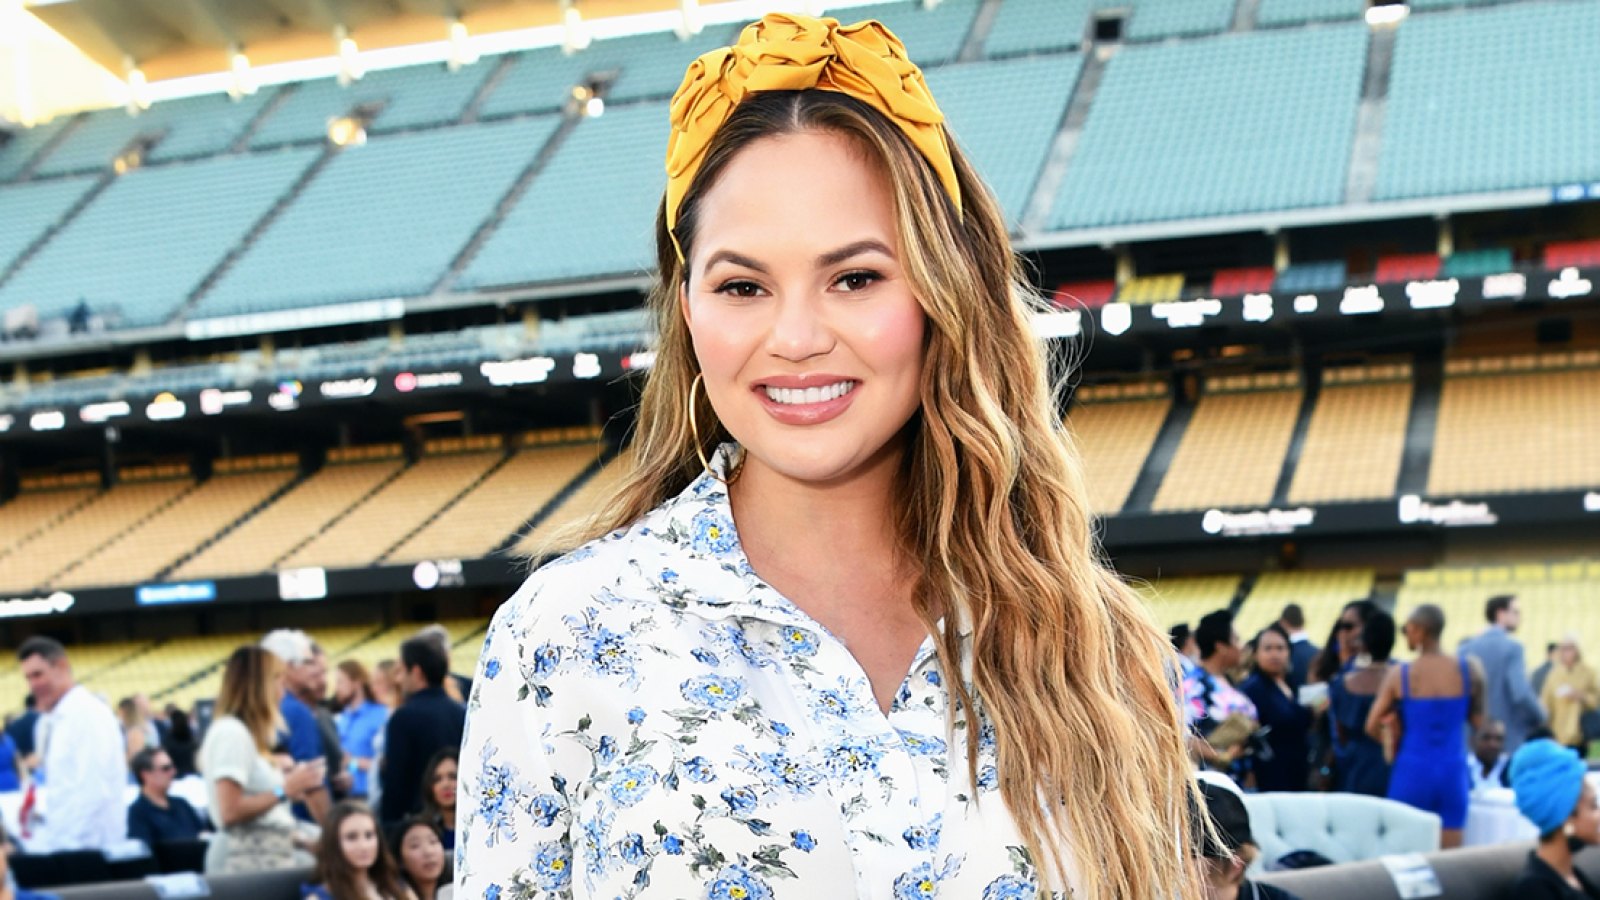 Chrissy Teigen Asks Toddler How School Went, Gets Unexpected Answer